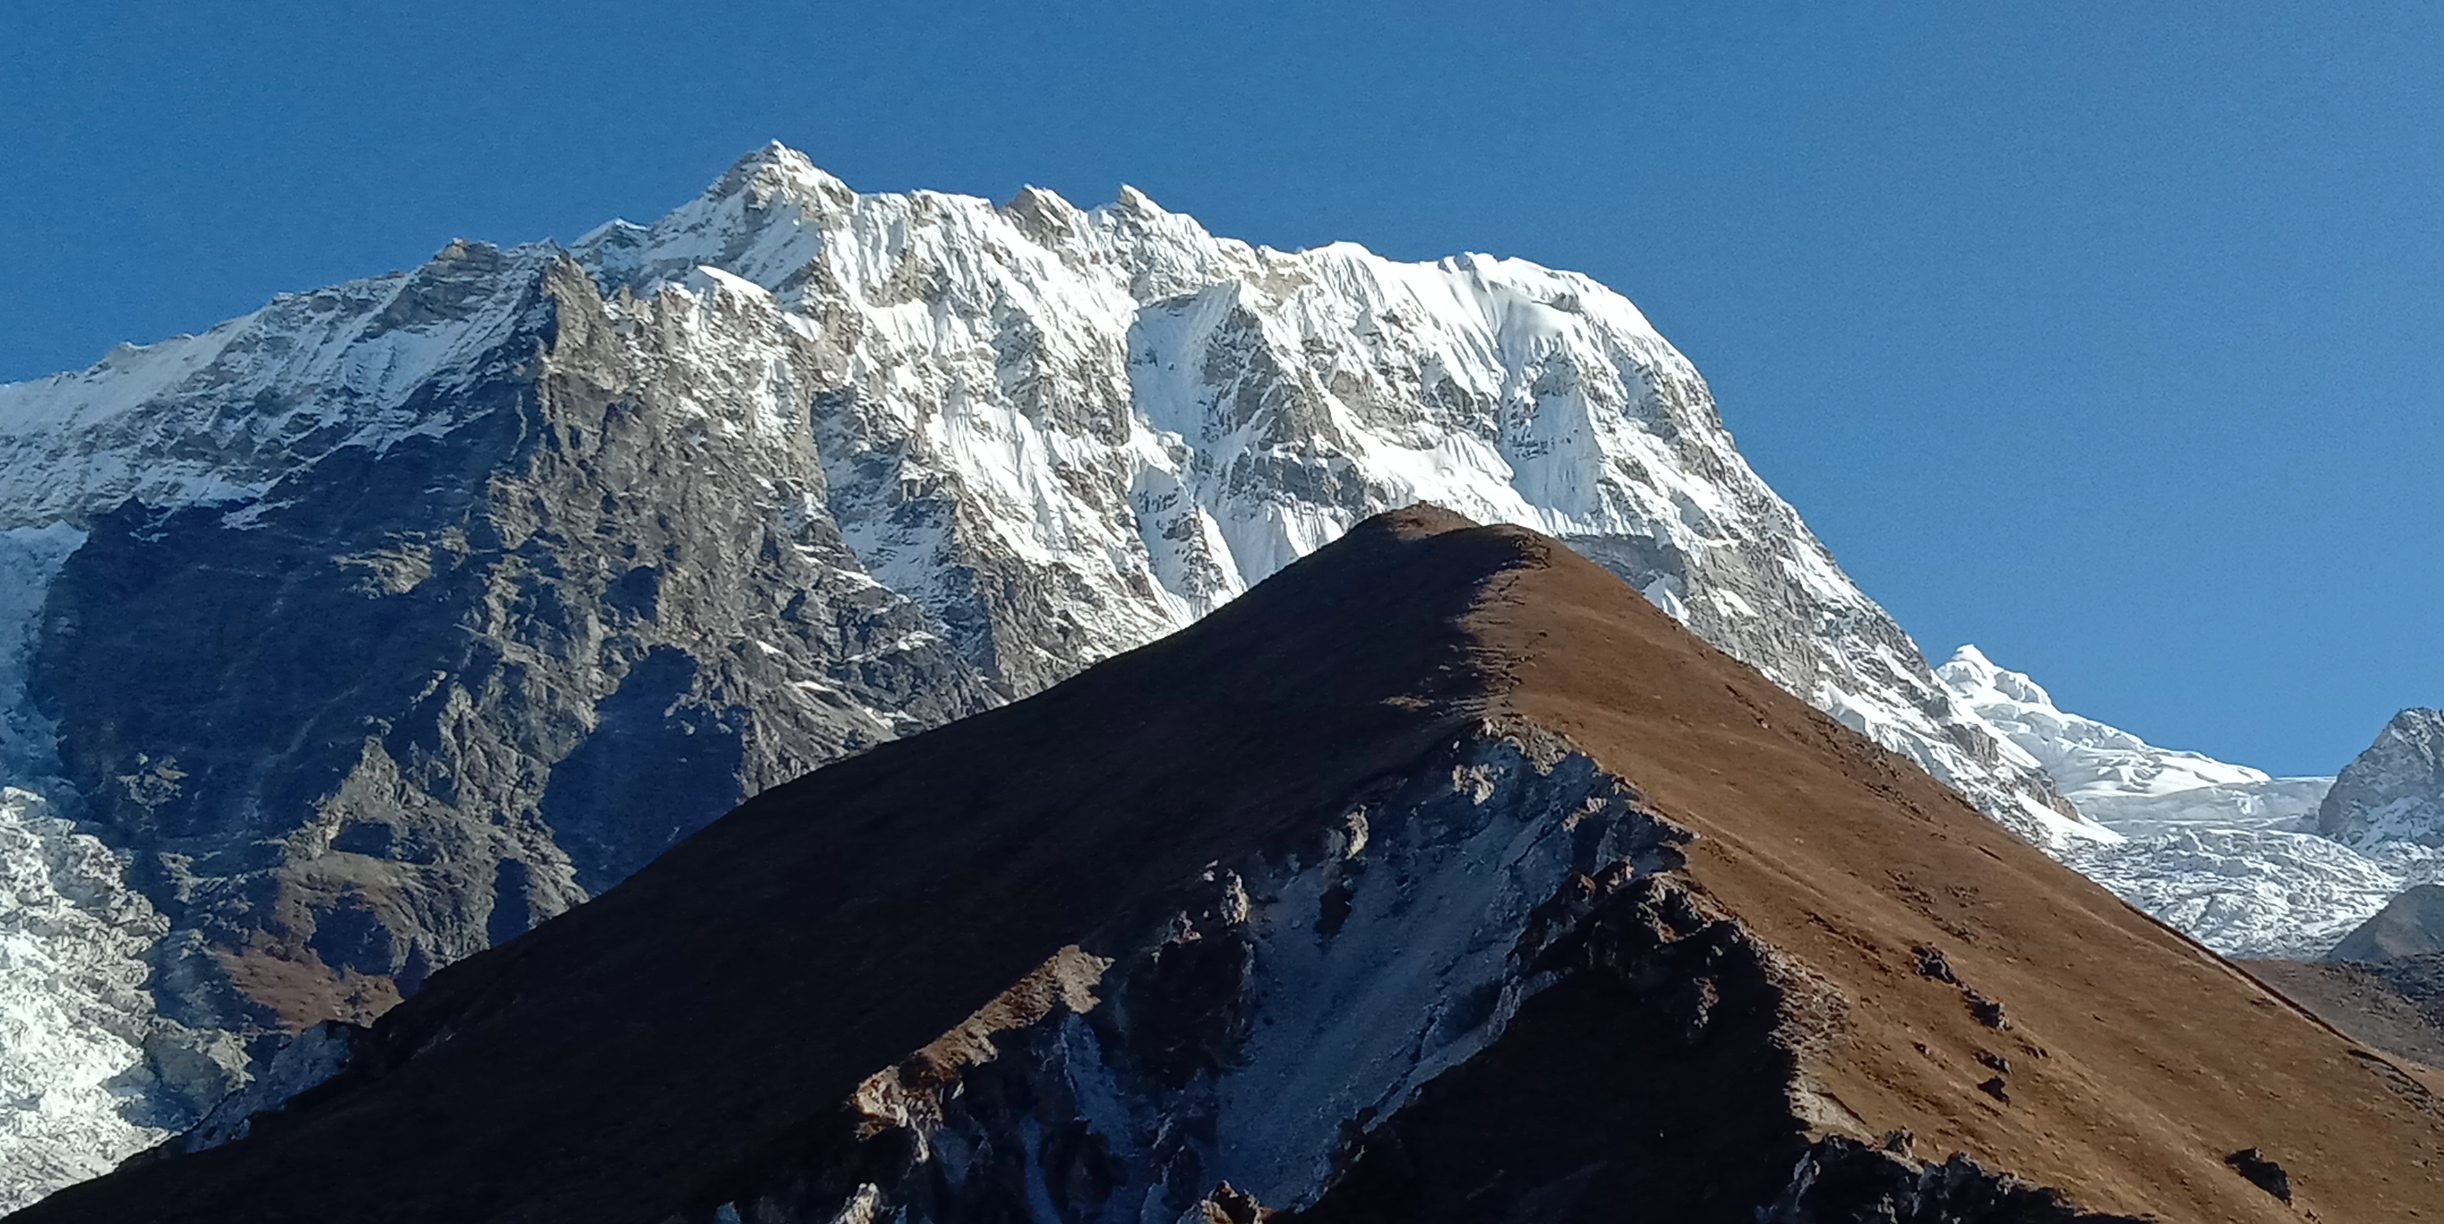 Unclimbed Himalayan Peak Sees First Ascent - Climbing